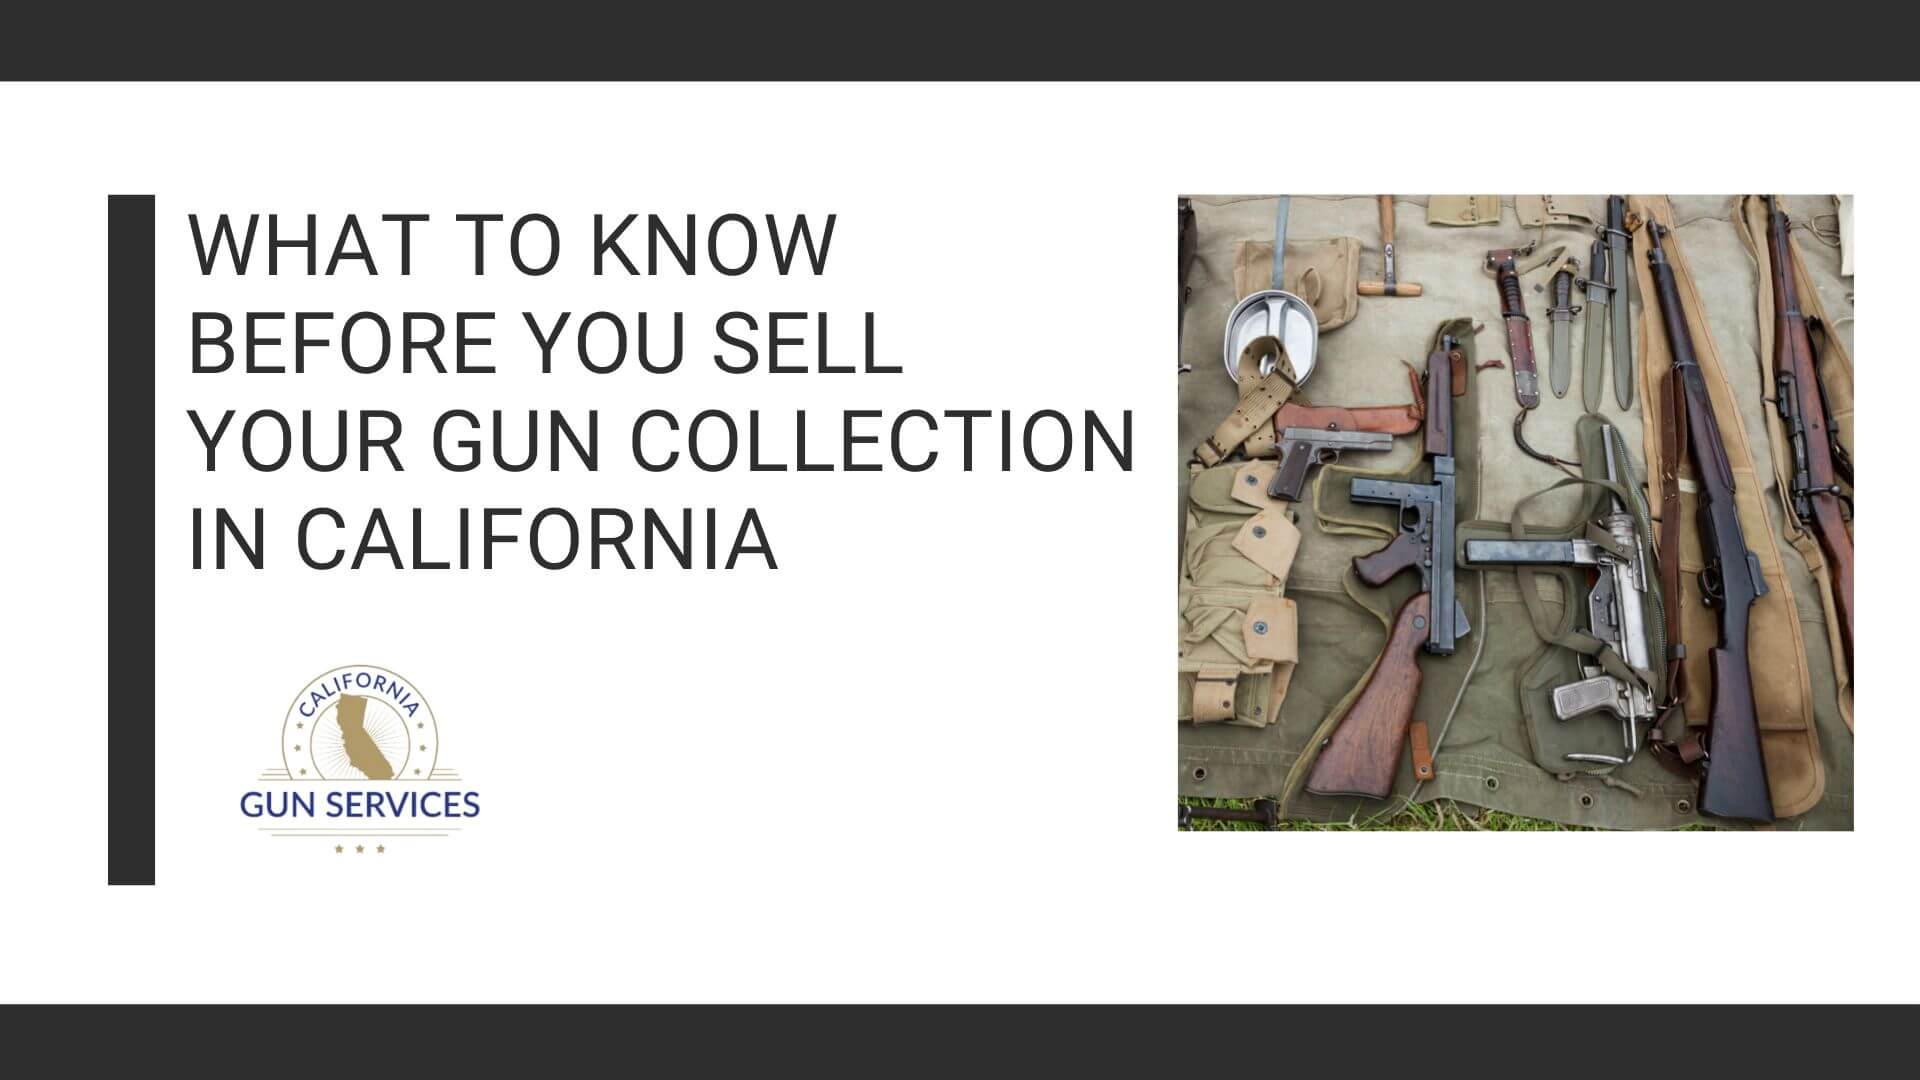 What To Know Before You Sell A Gun Collection In California, California Gun Services